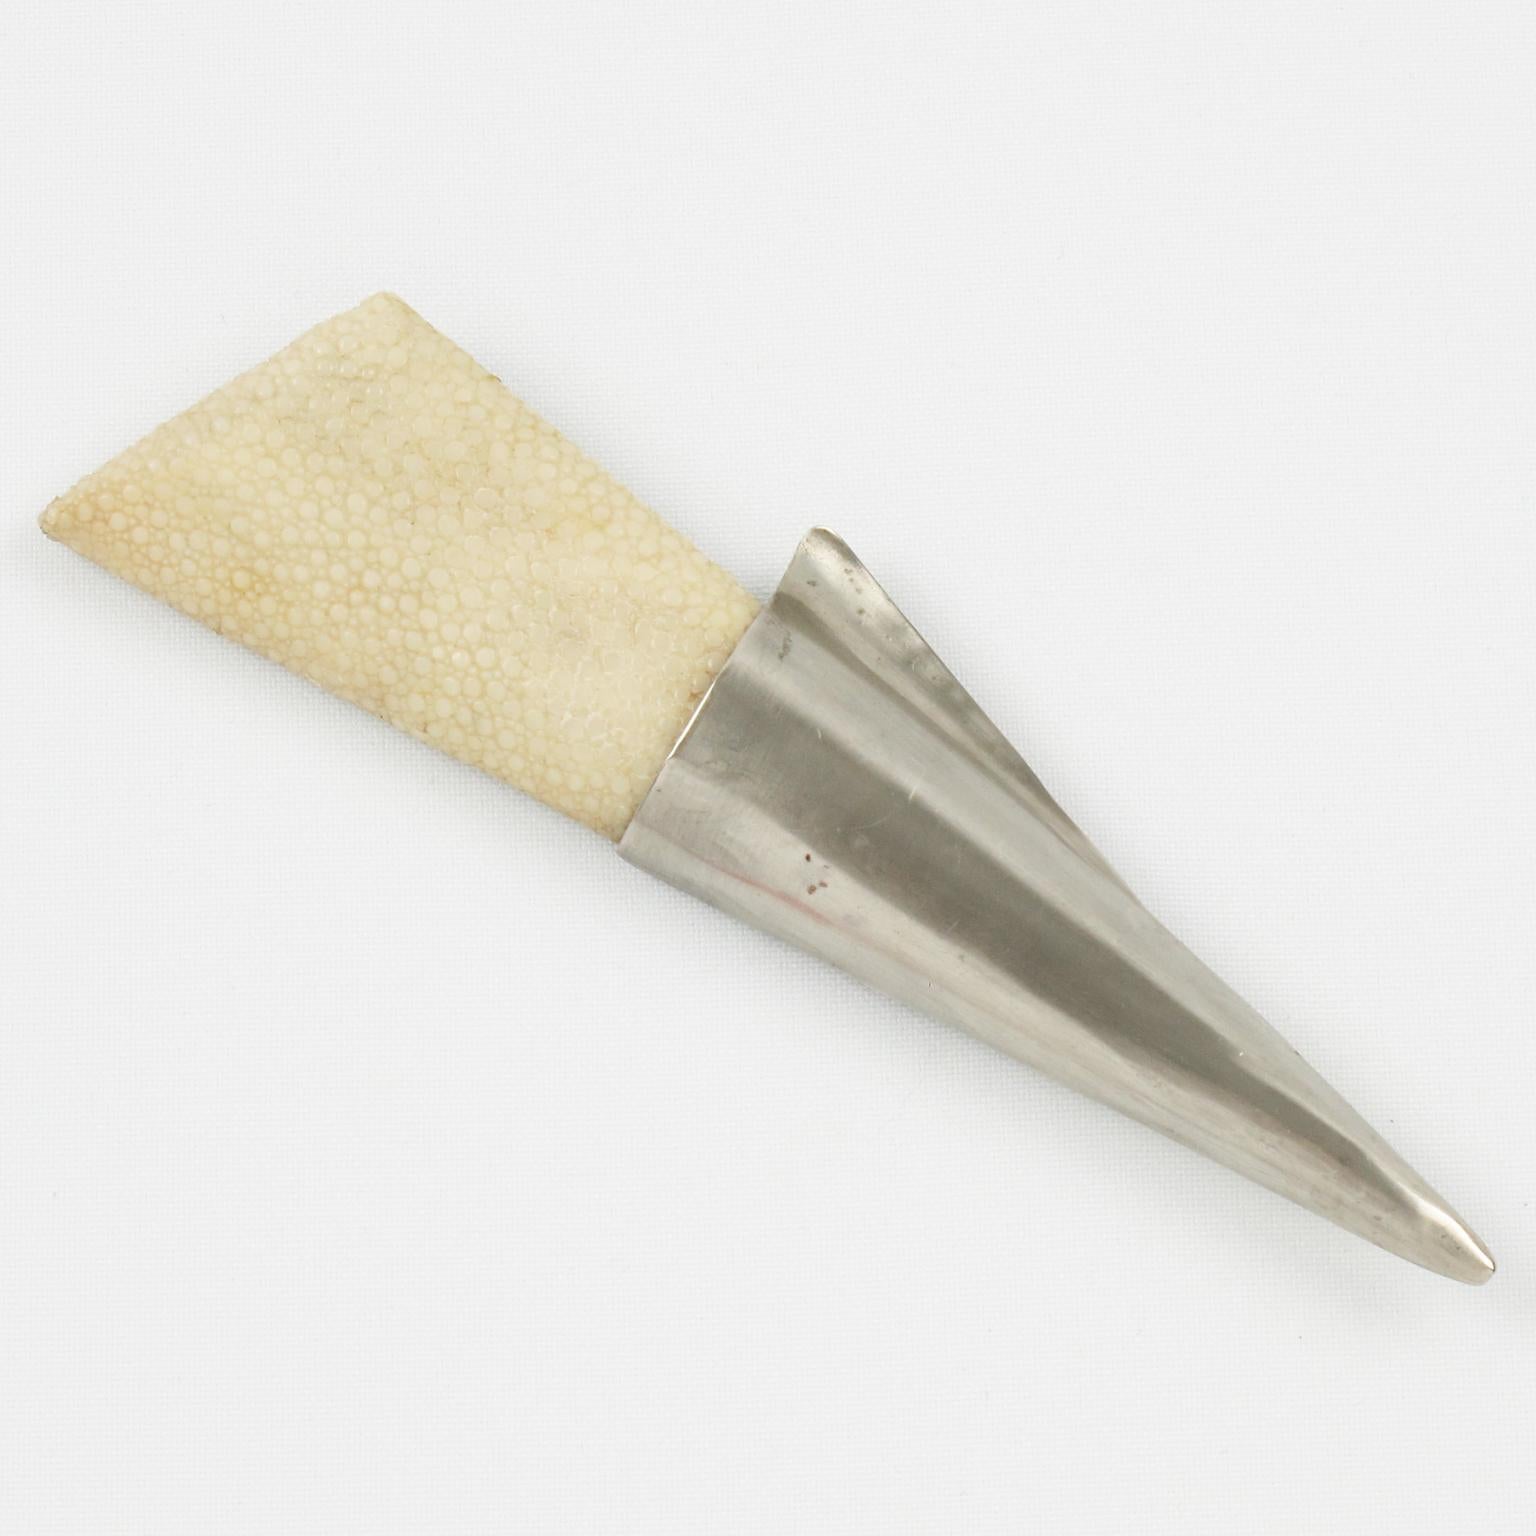 This is a fancy Fabrice Paris pin brooch. This Art-Deco-inspired piece features an oversized elongated dimensional shape with silvered metal in a brushed finish aspect and natural shagreen (stingray skin) in off-white color. The piece has a security